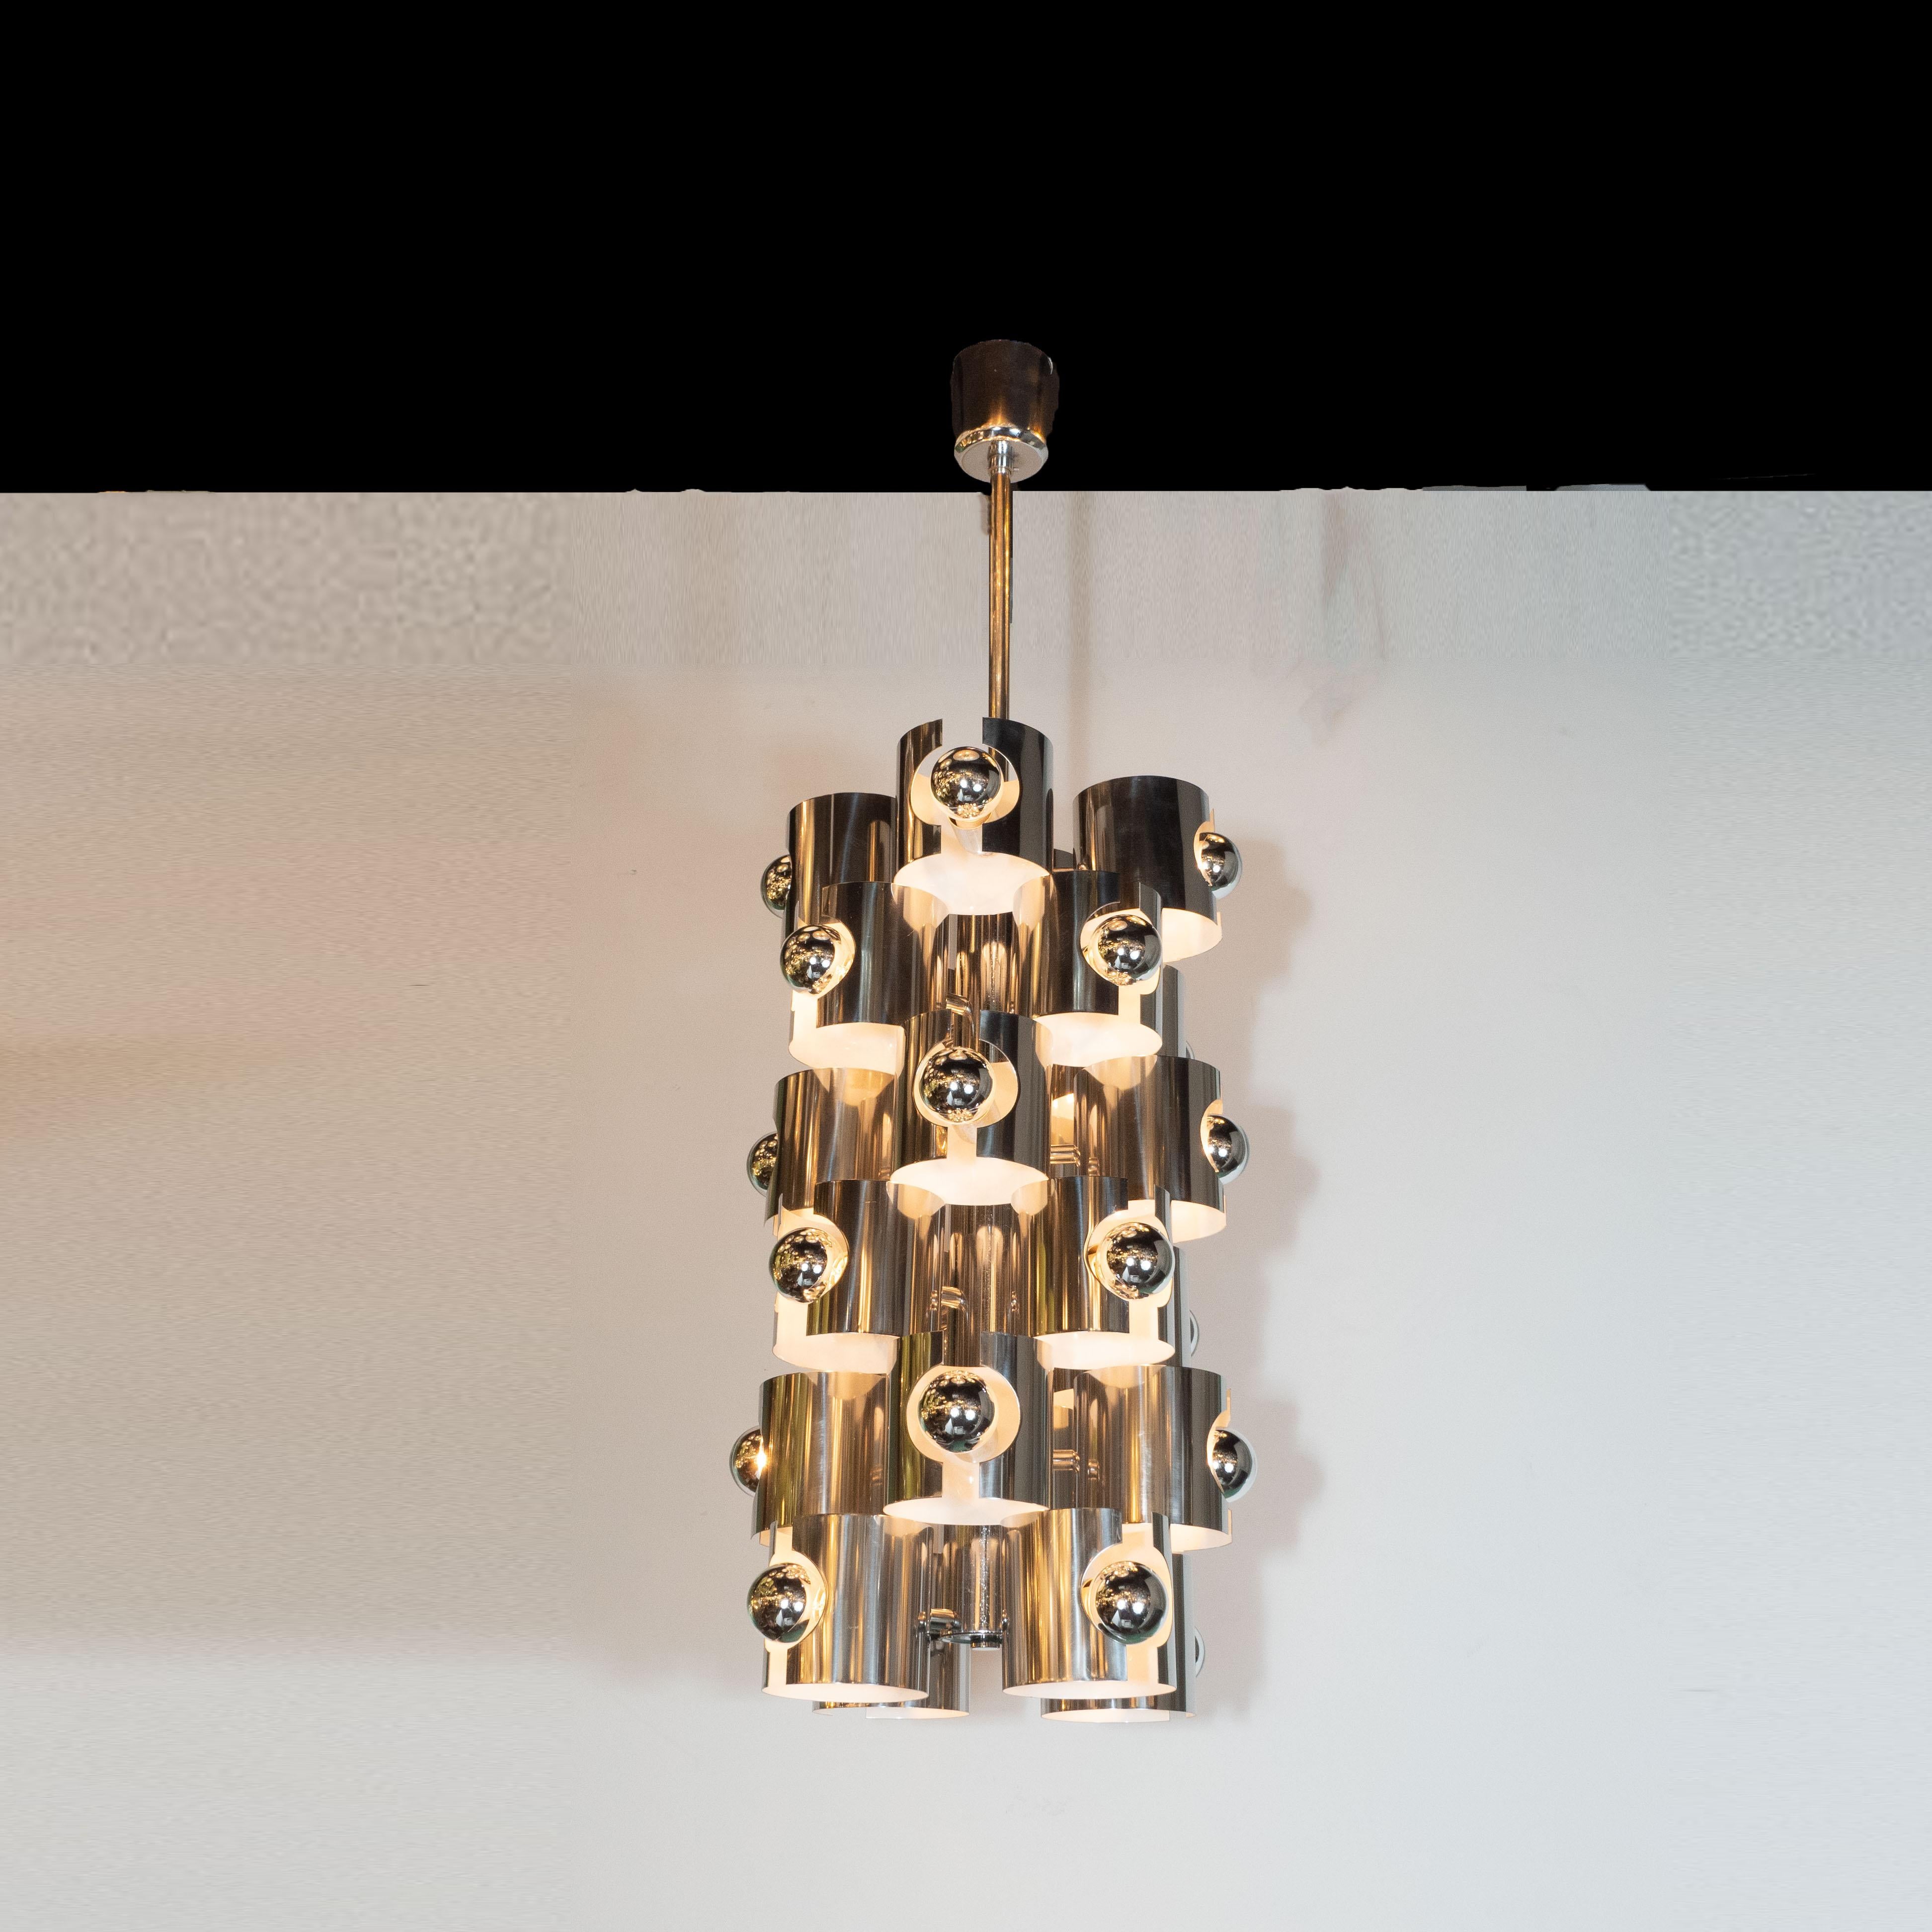 This sculptural and graphic Mid-Century Modern chandelier was realized by the esteemed lighting atelier, Gaetano Sciolari, in Italy circa 1970. A rare and especially stunning example of his practice, this features six tiers extending from a central